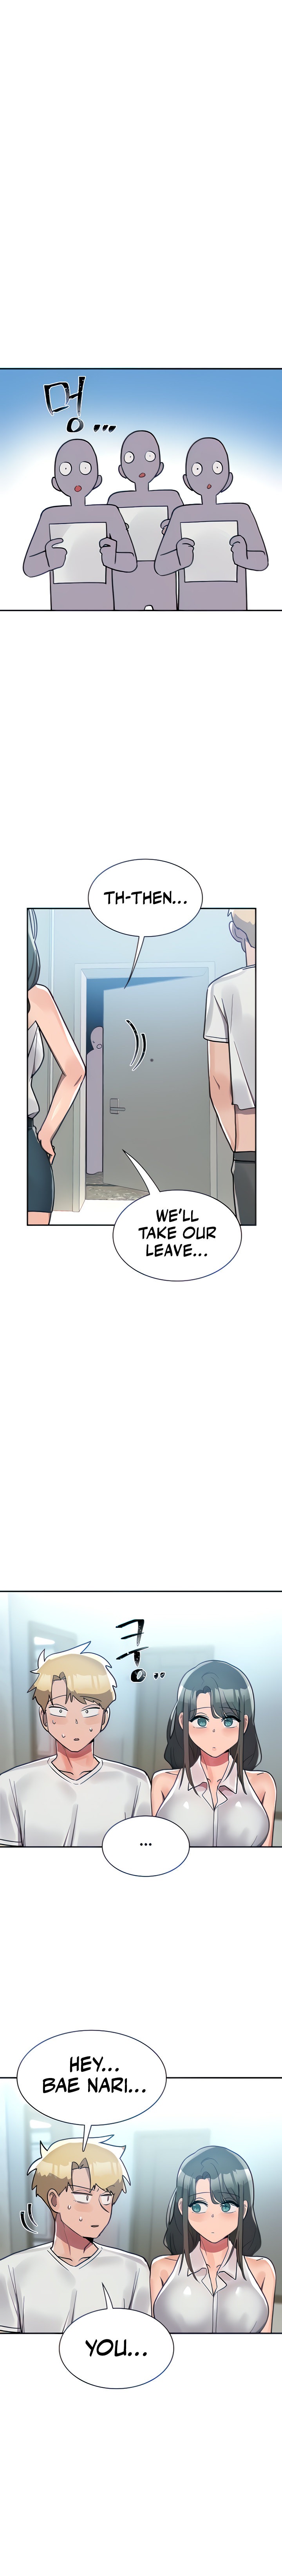 Relationship Reverse Button: Let’s Educate That Arrogant Girl - Chapter 8 Page 3